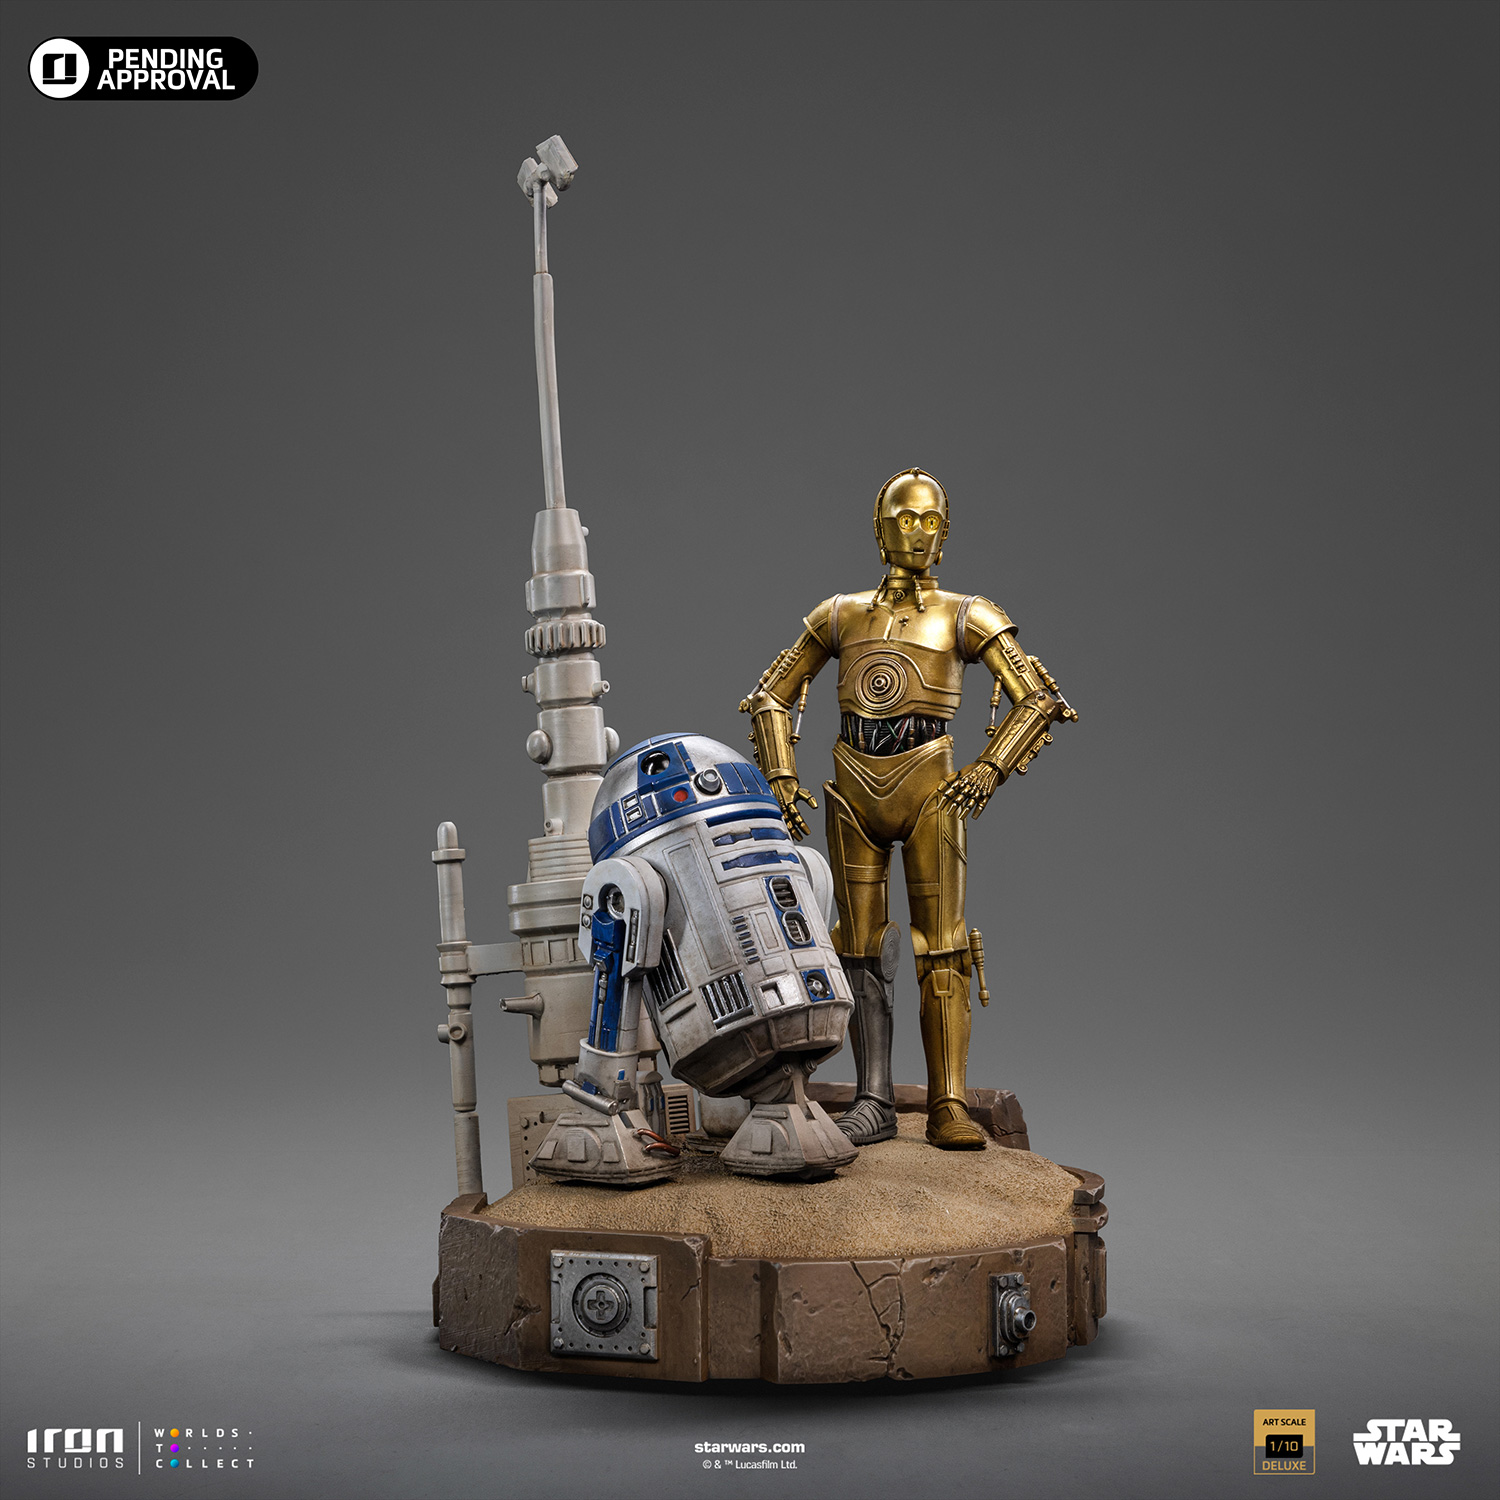 Star Wars C-3PO and R2D2 Deluxe 1:10 Scale 